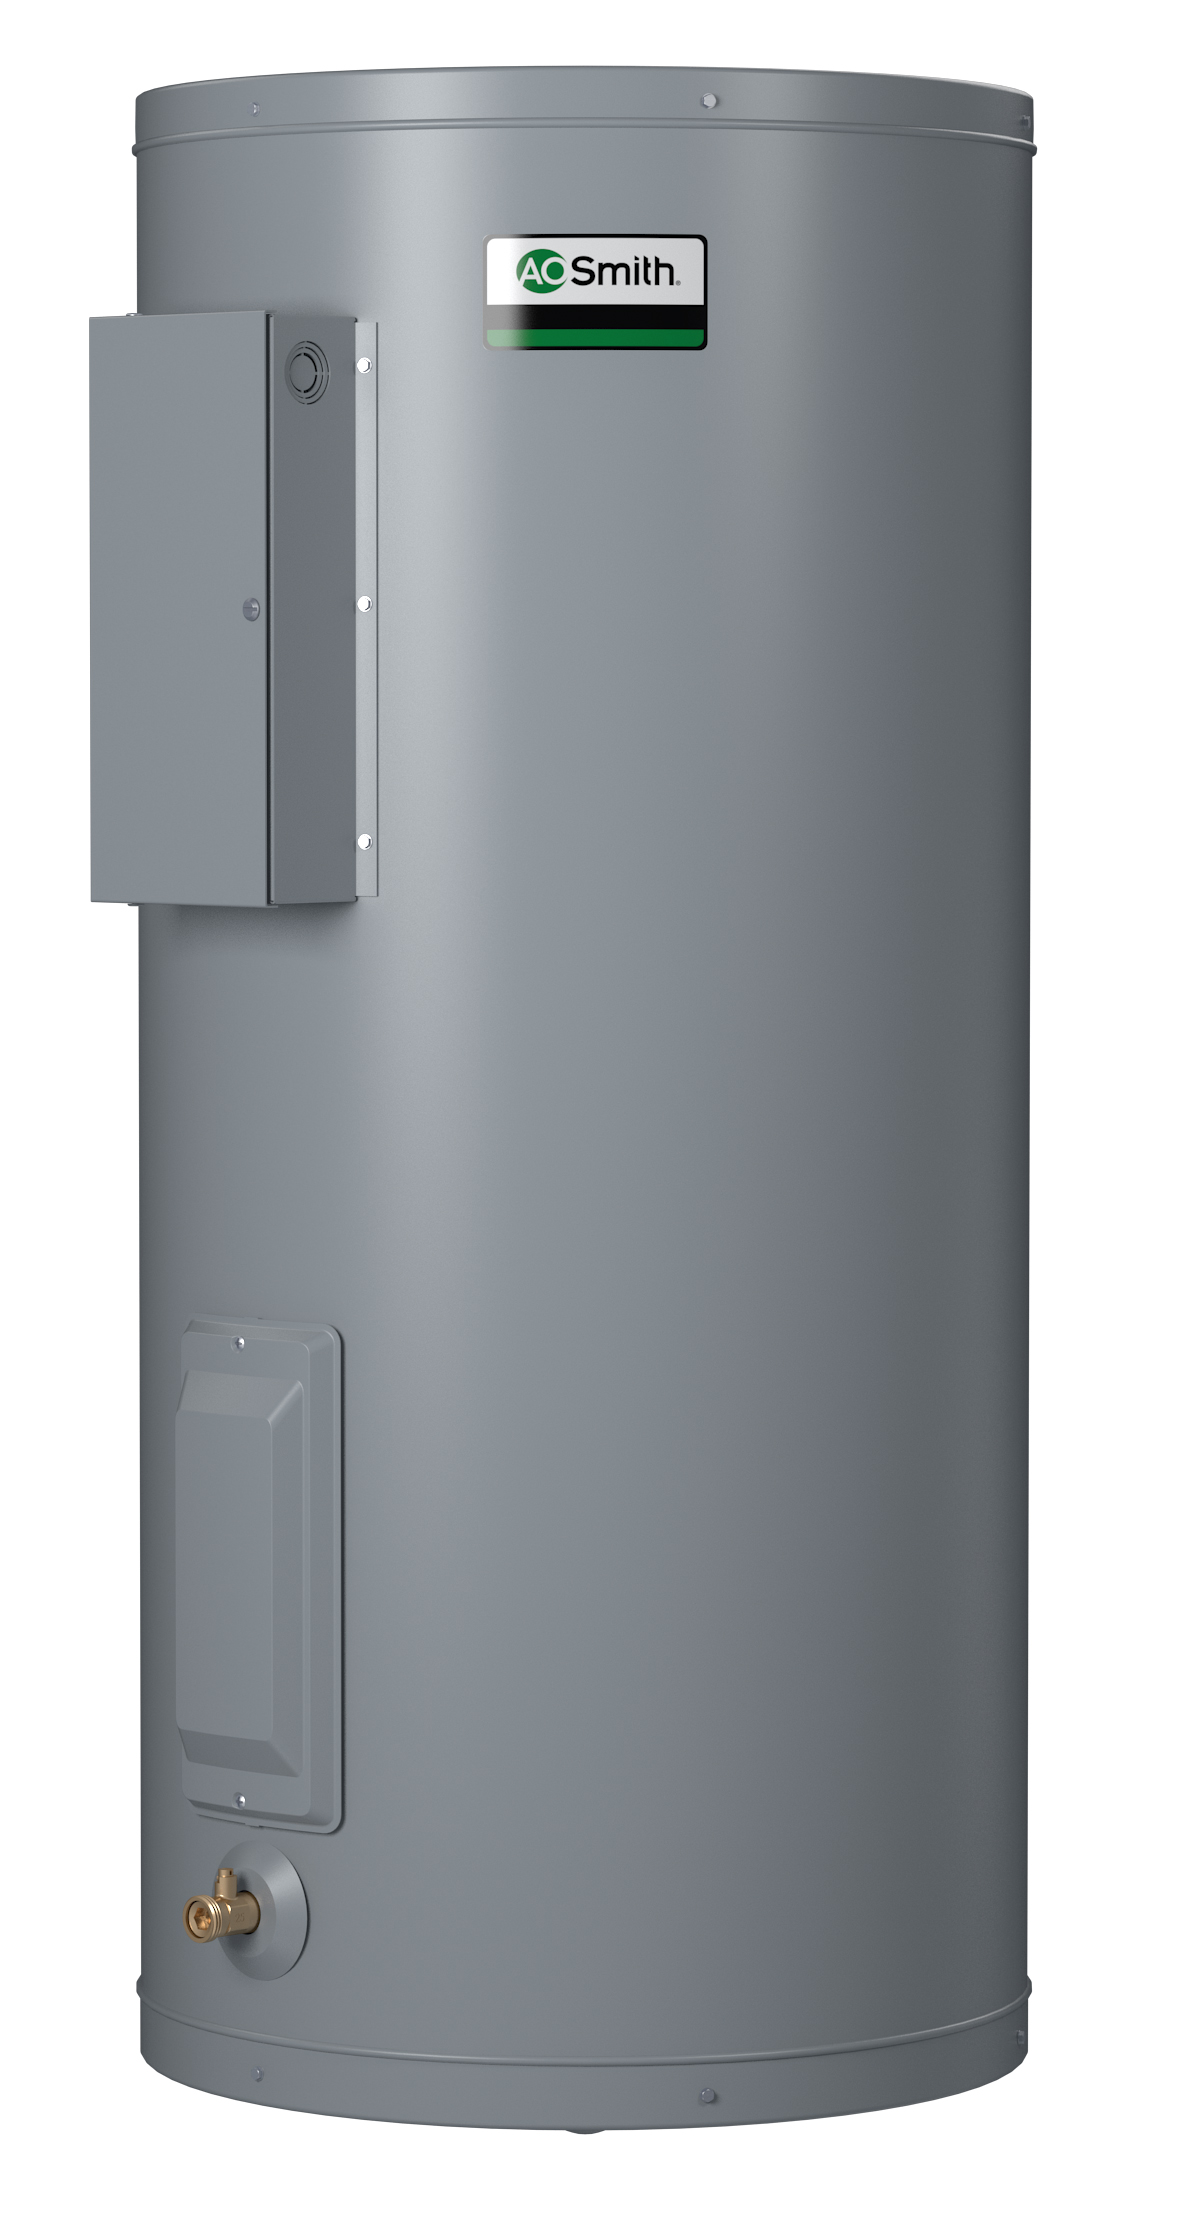 AO SMITH DEN-120D: 120 GALLONS, 12.2KW, 480 VOLT, 1 PHASE, (2-6100 WATT ELEMENTS, SIMULTANEOUS WIRING), DURA-POWER, LIGHT DUTY COMMERCIAL ELECTRIC WATER HEATER